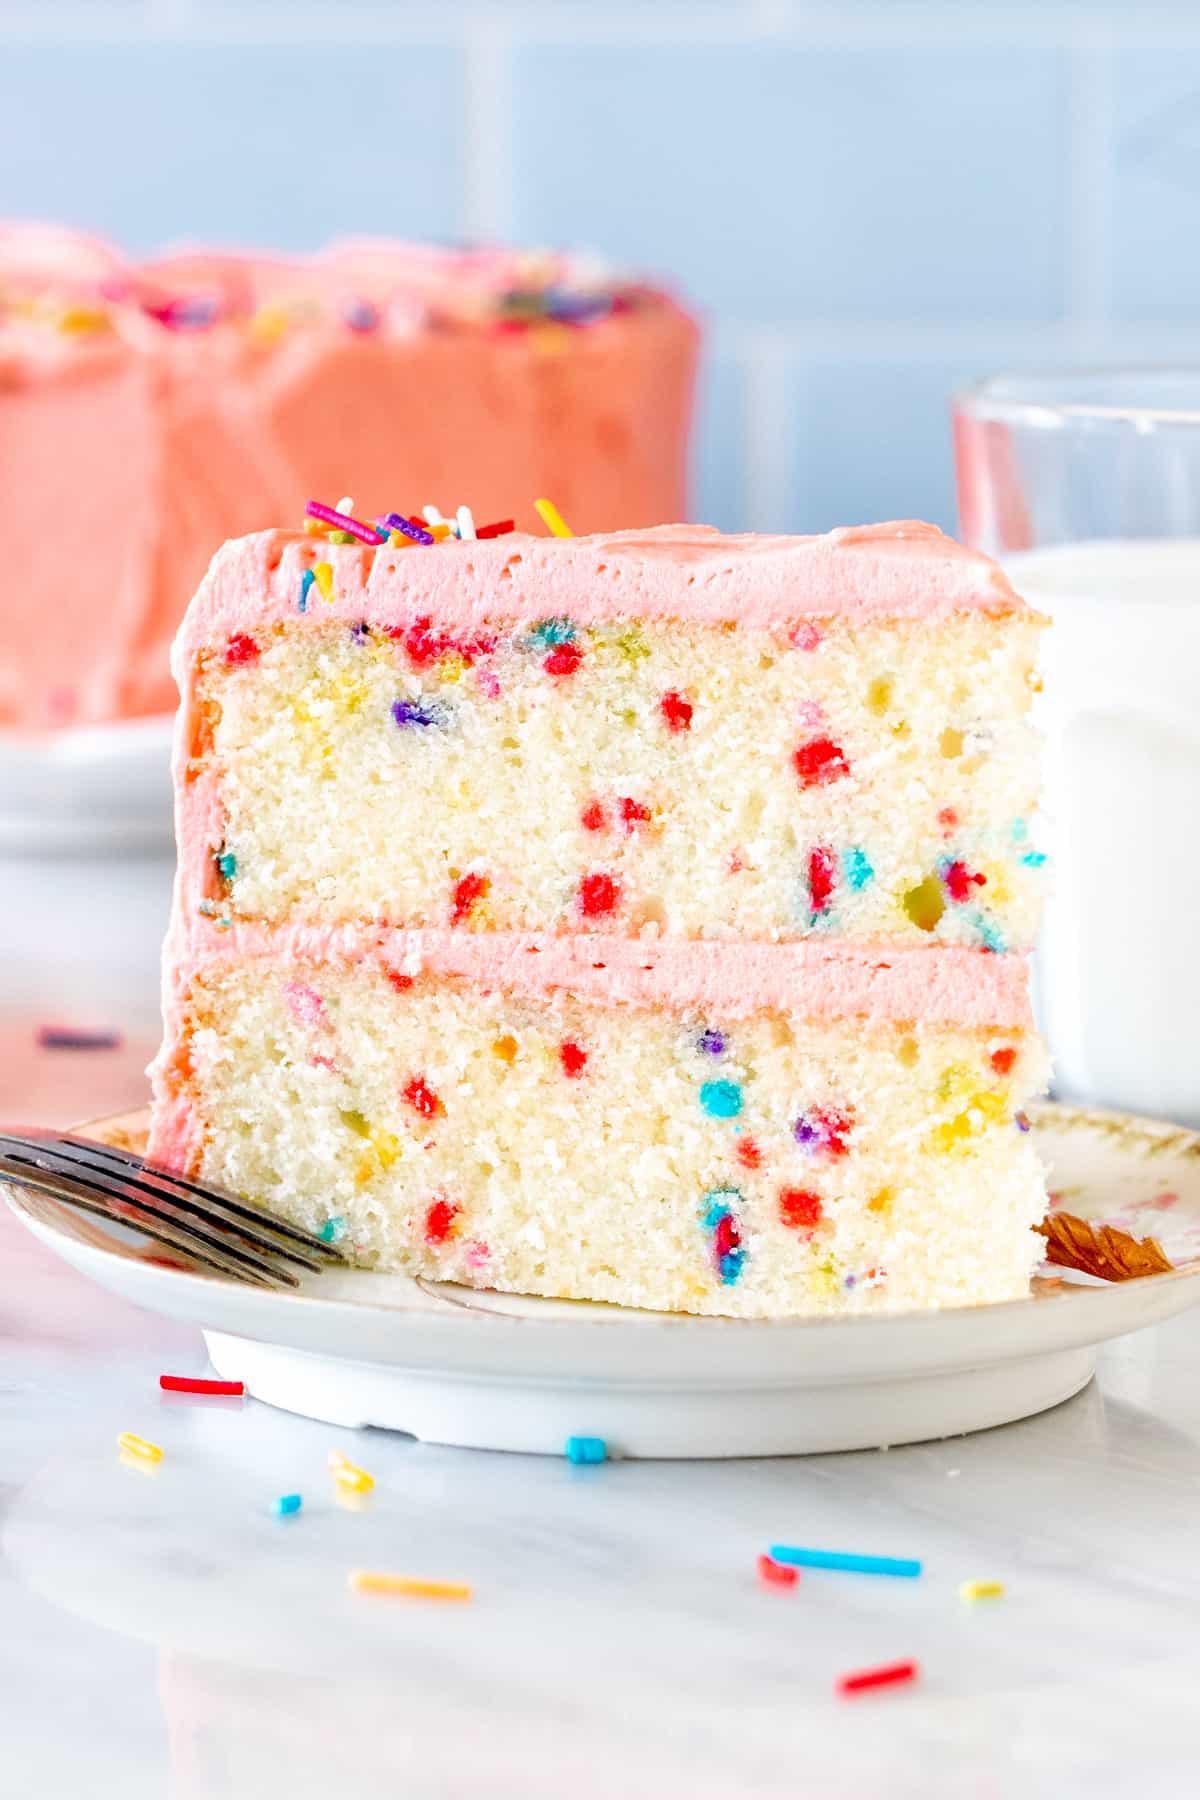 Slice of funfetti cake with pink frosting